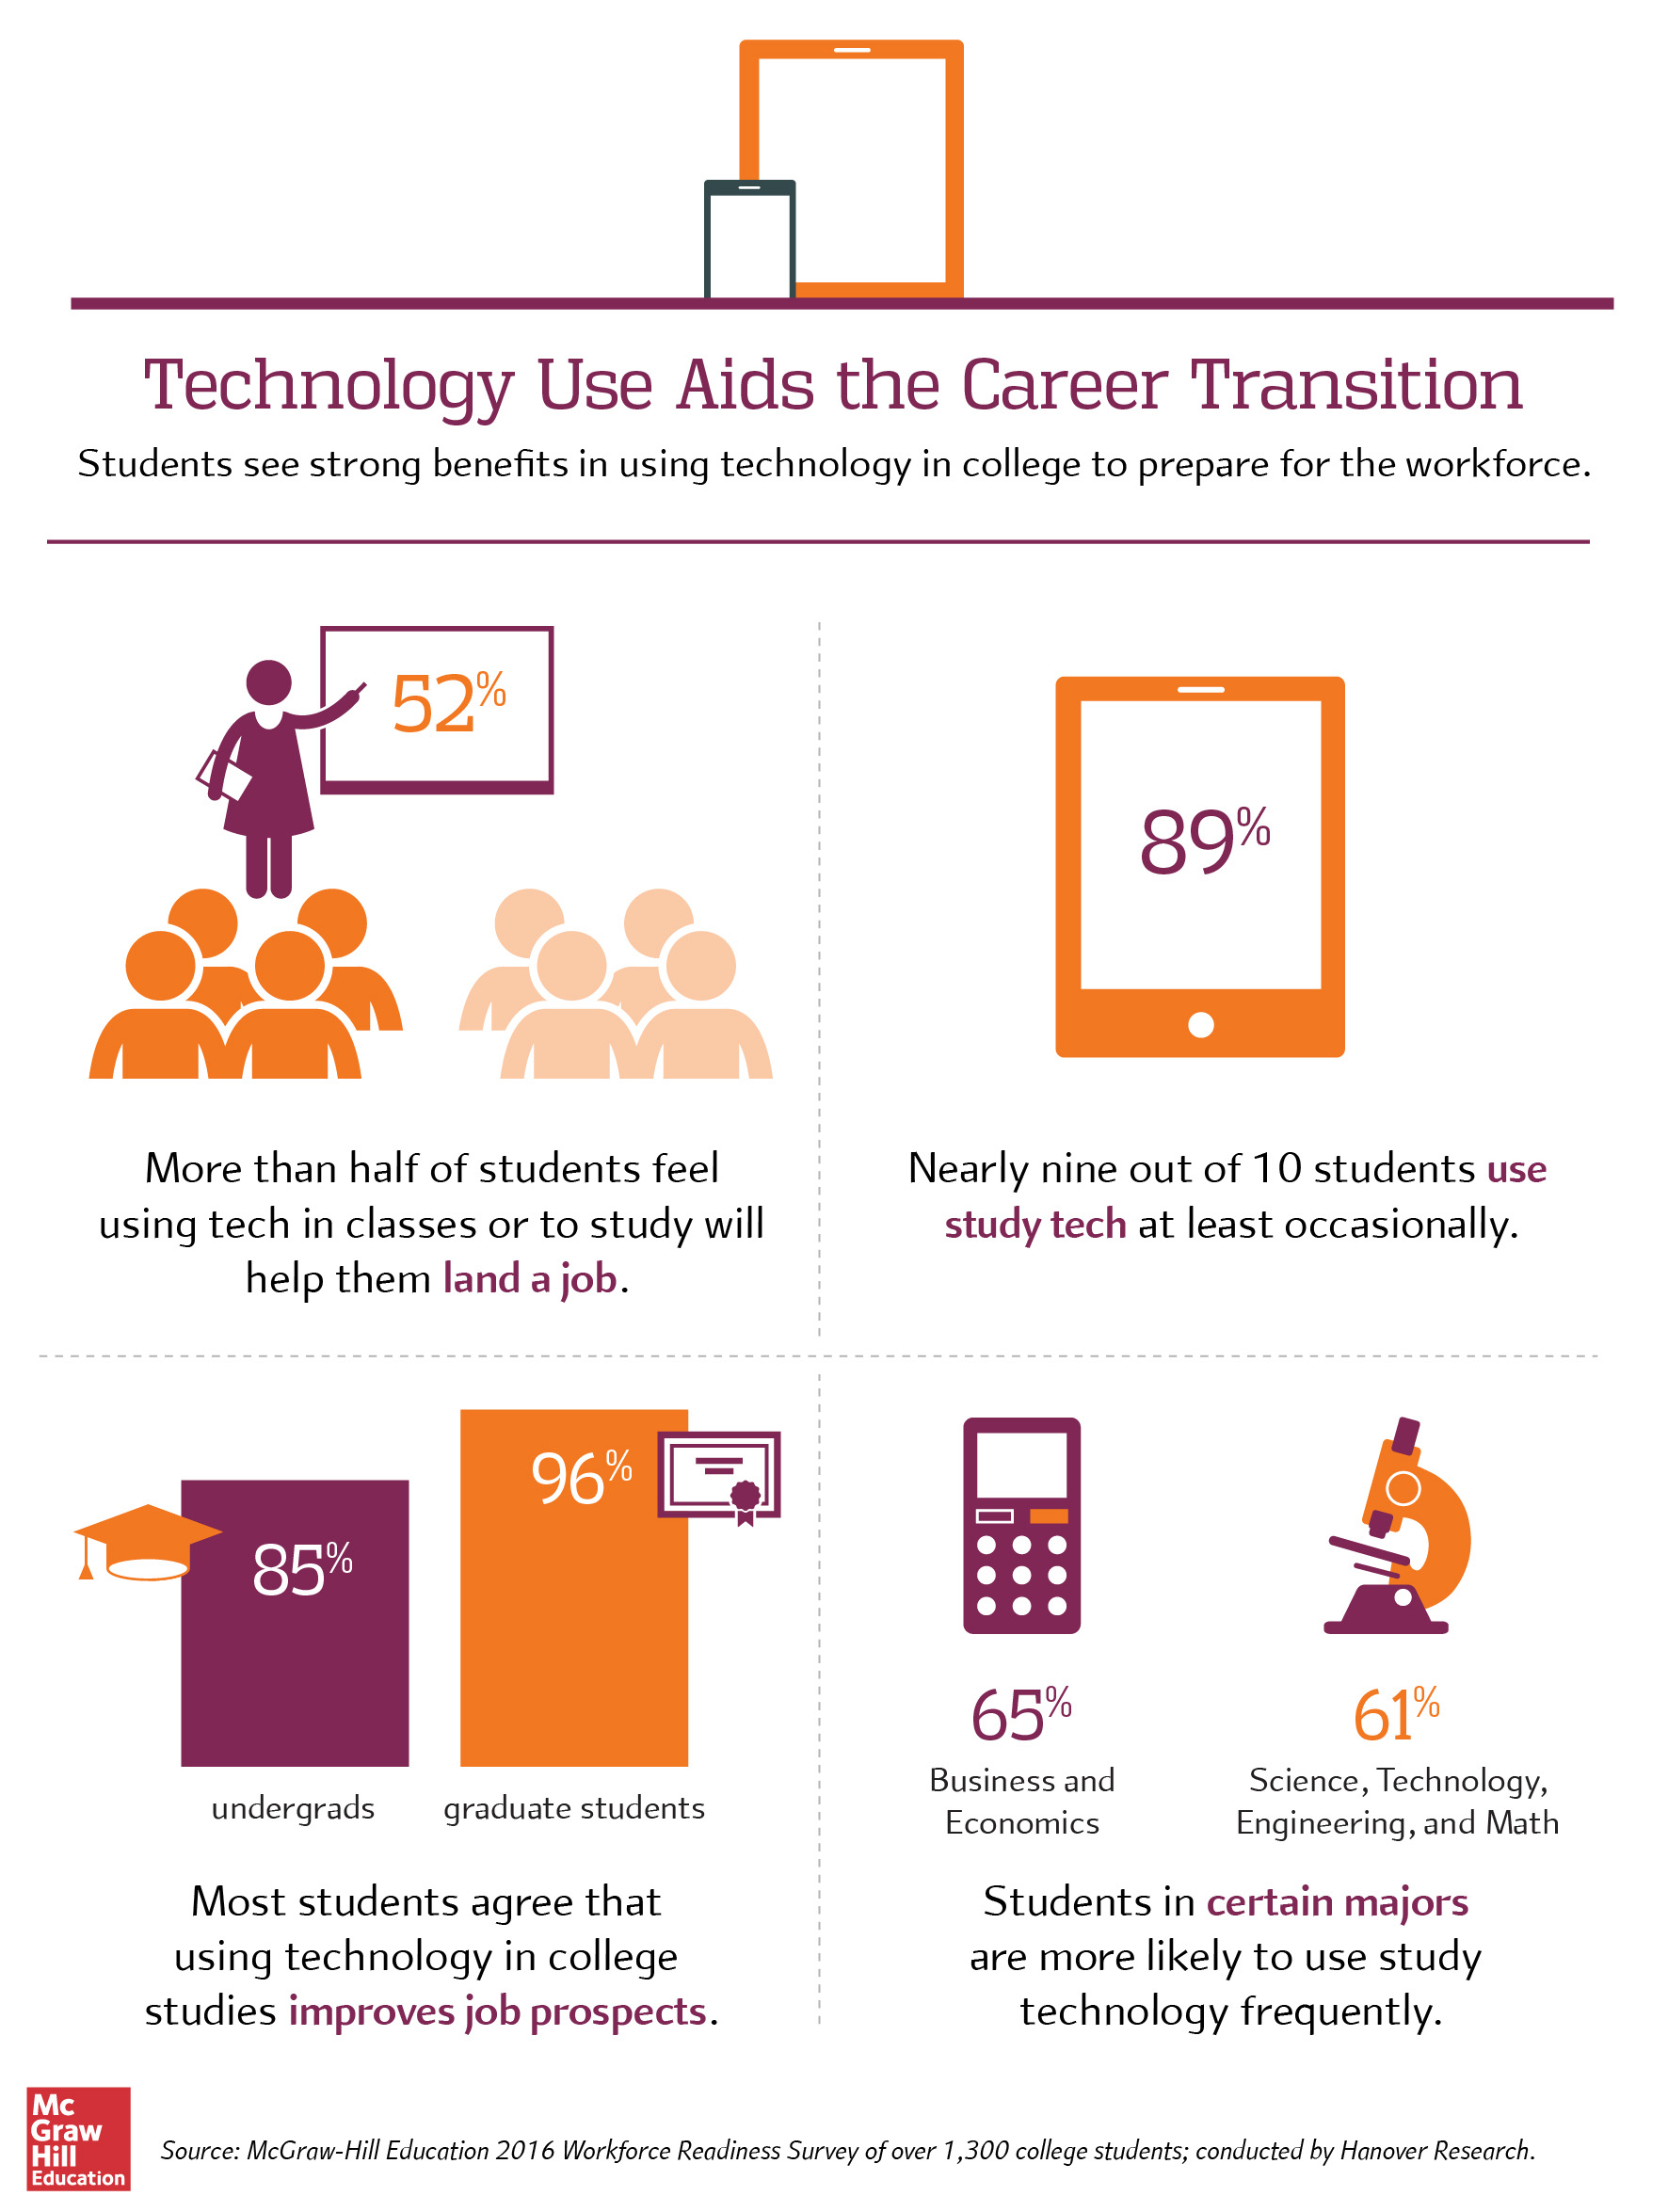 Tech Aids the Career Transition